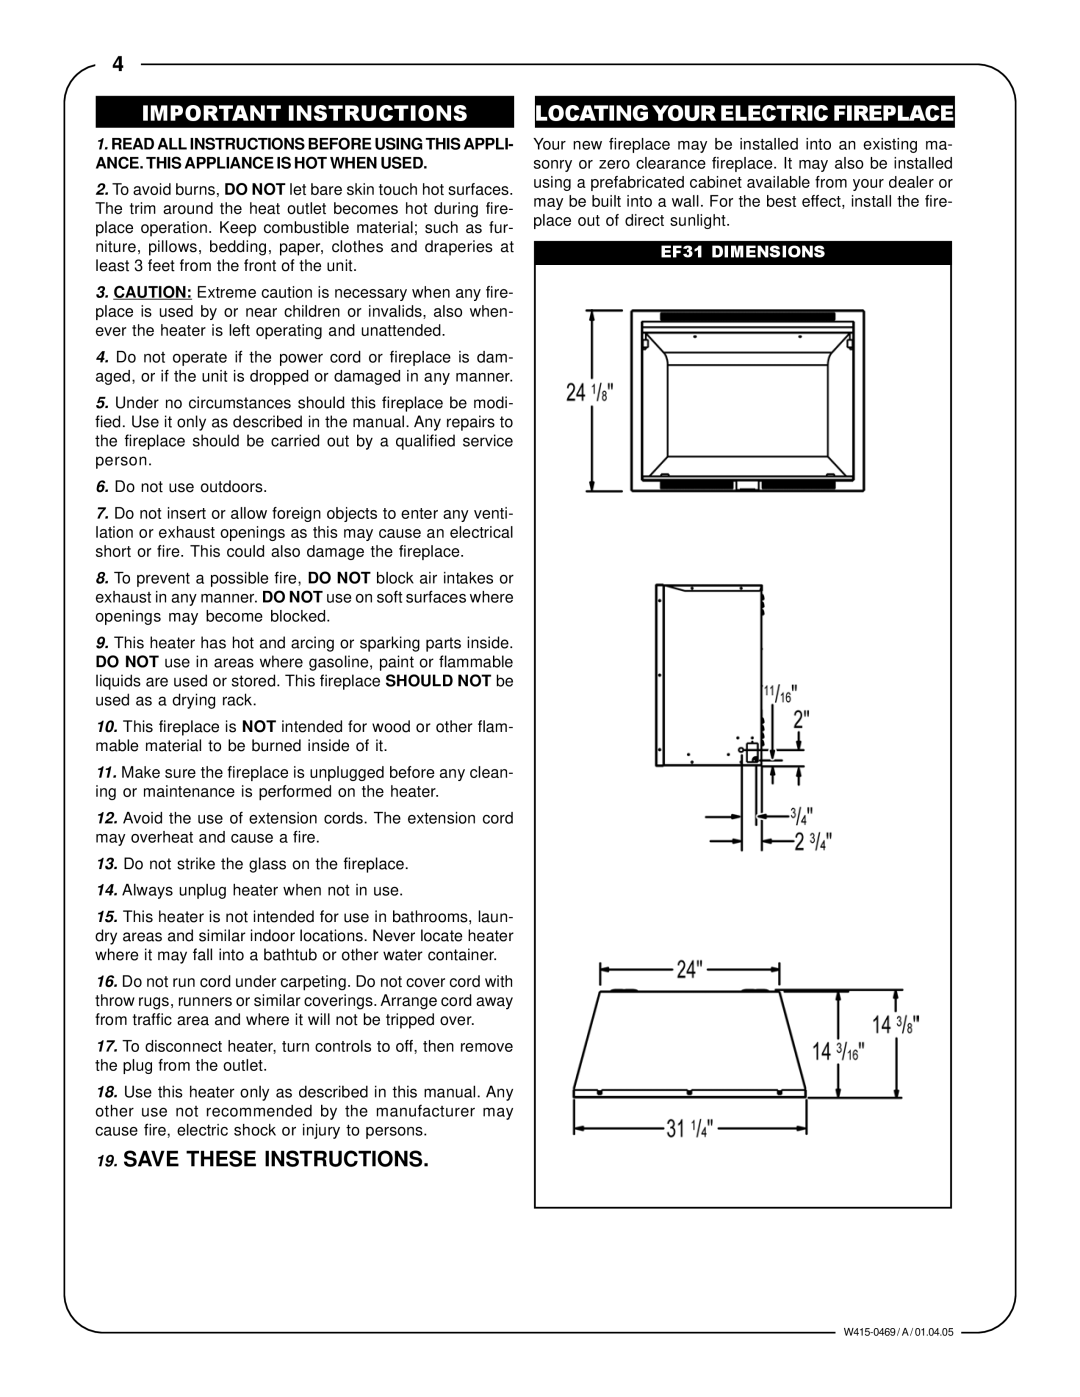 Napoleon Fireplaces EF31H manual Important Instructions, Locatingyour Electric Fireplace, Save These Instructions 